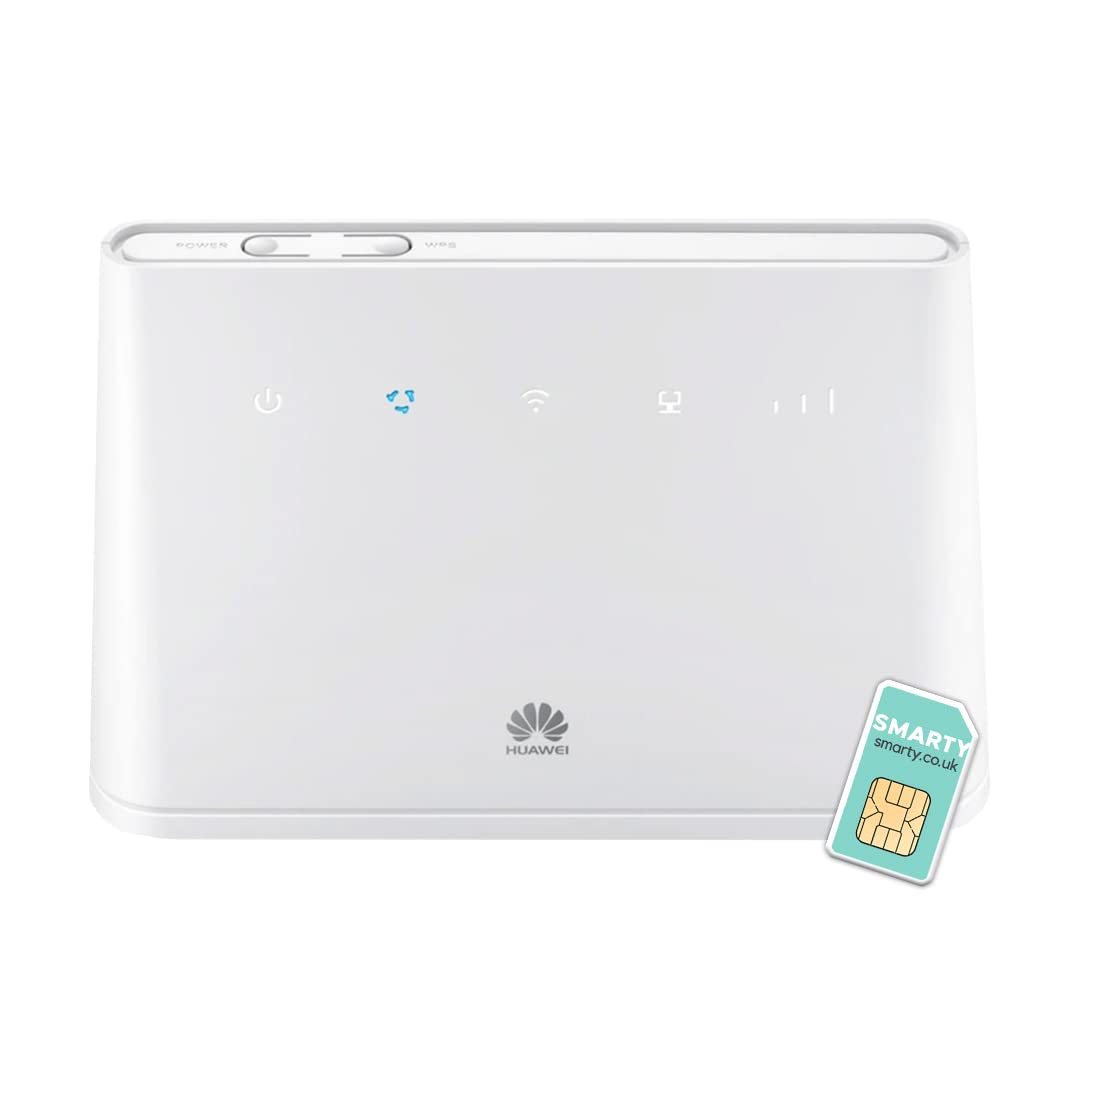 Huawei B311, CAT 4, 4G/ LTE 150 Mbps Mobile Wi-Fi Router, Unlocked to All Networks- Genuine UK Warranty STOCK (Non Network Logo) with FREE SMARTY SIM Card- White B311-221